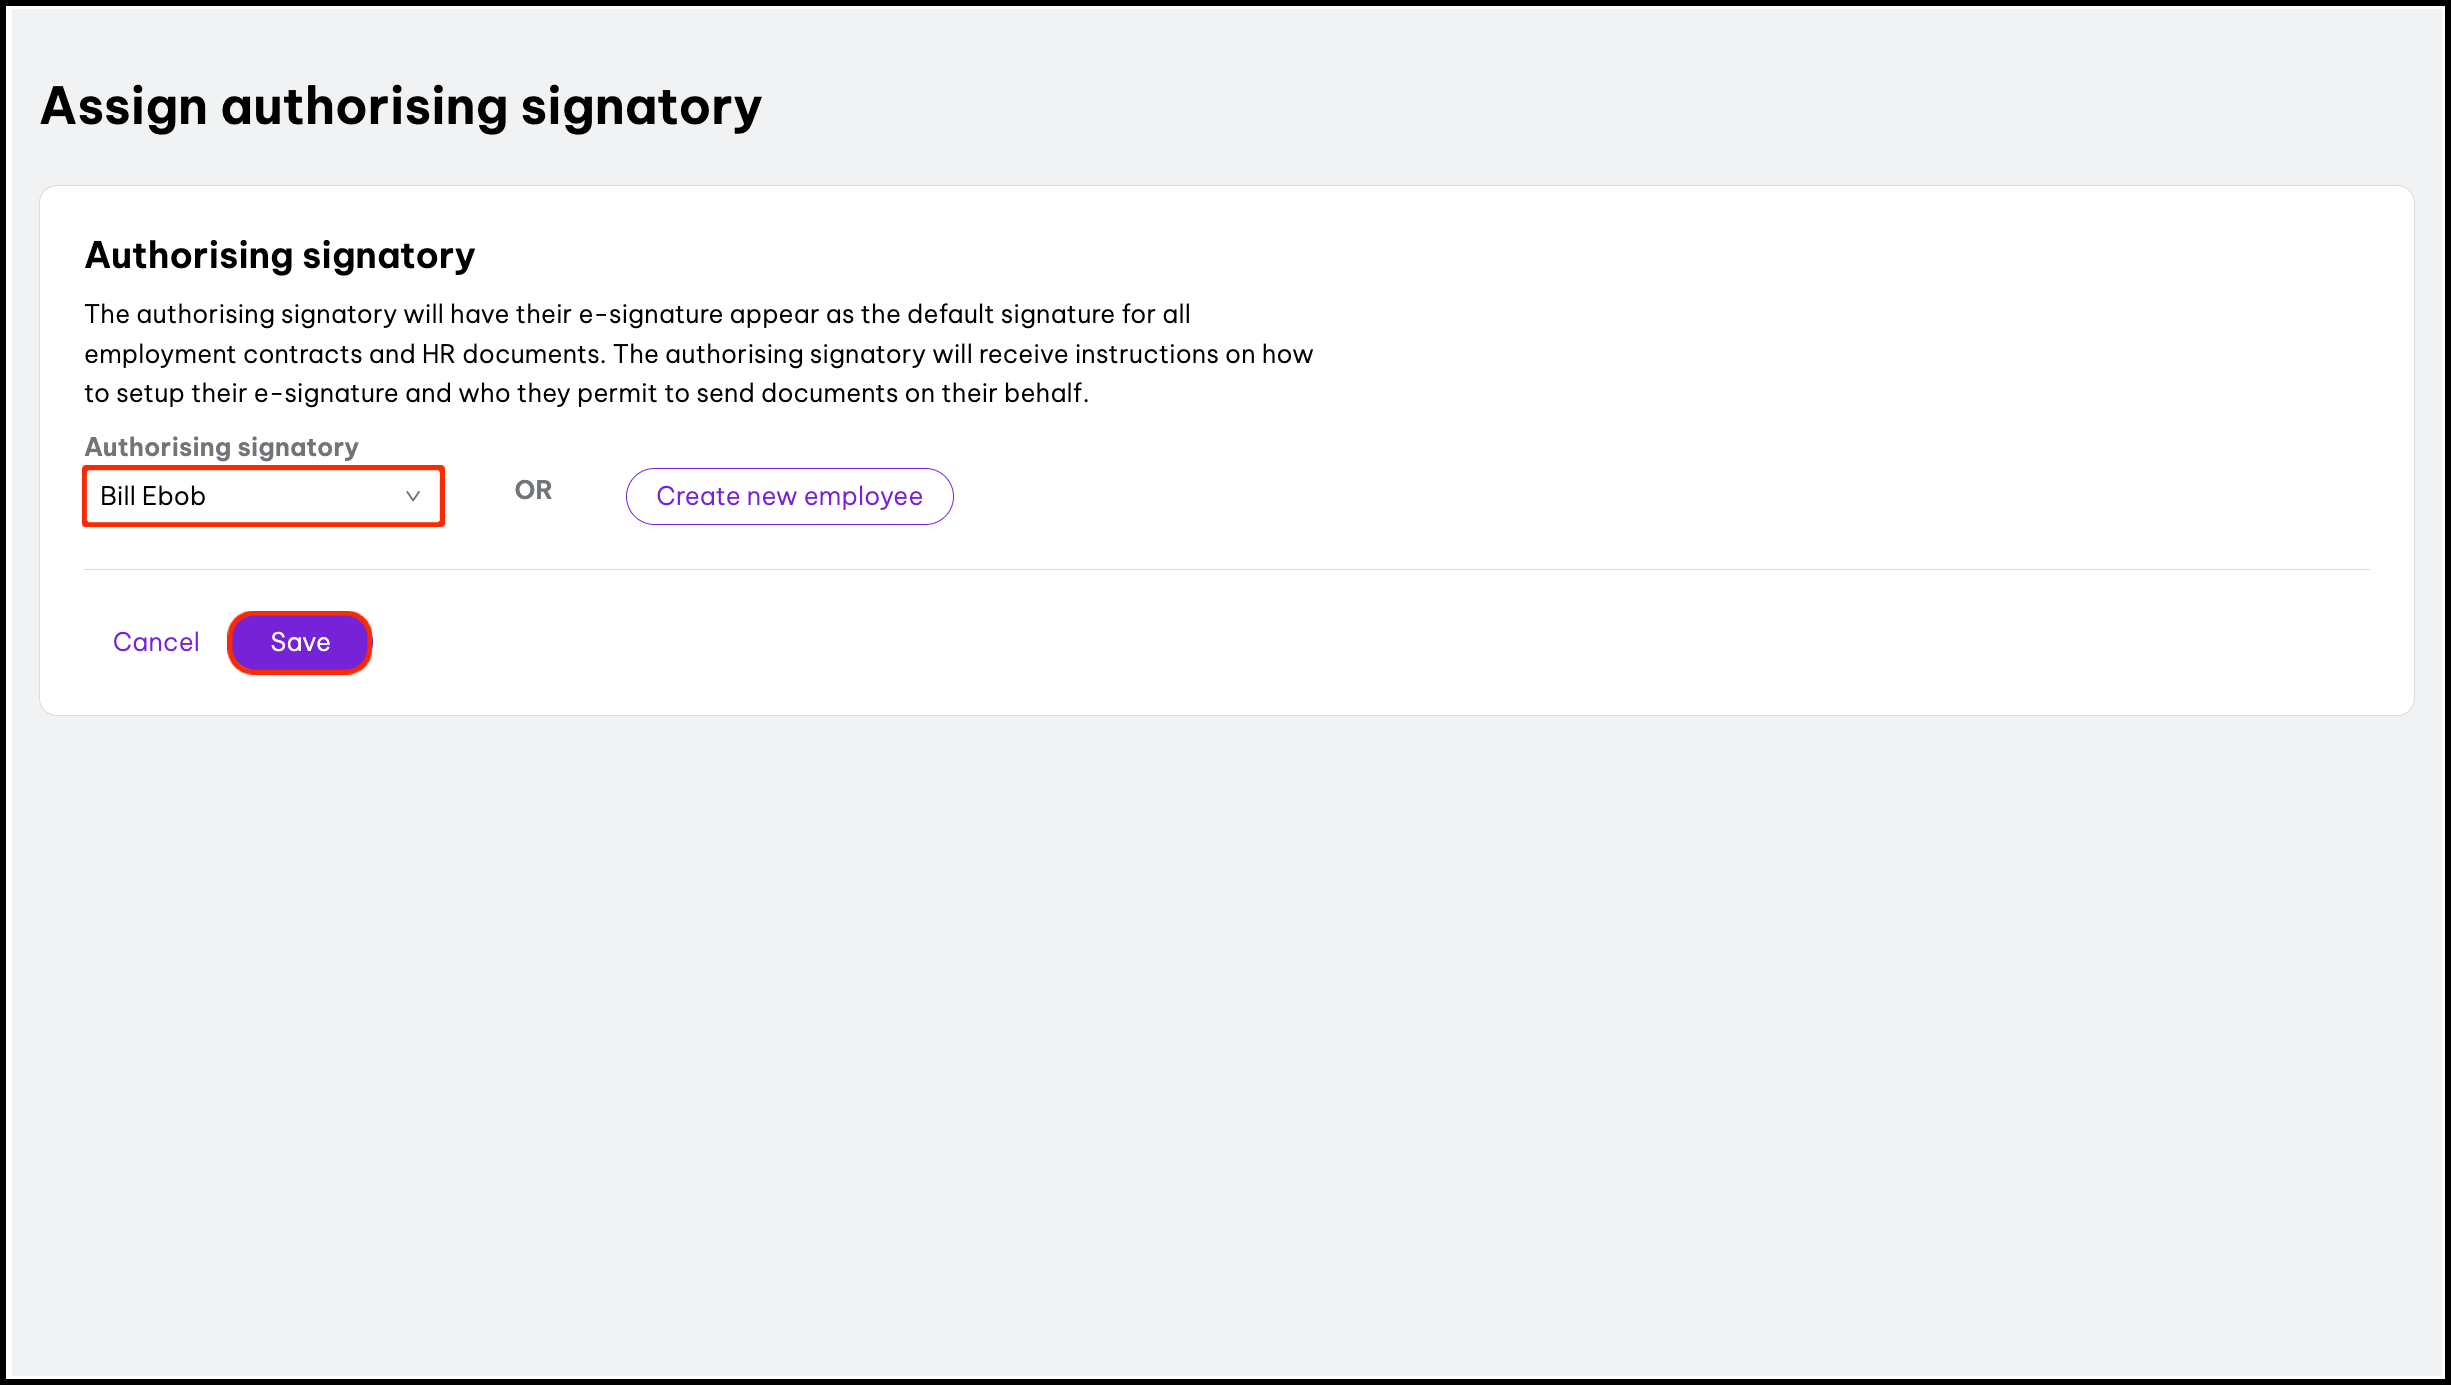 screenshot of assign authorising signatory page. there is a field for choosing name of signatory, and options to create new employee, cancel or save